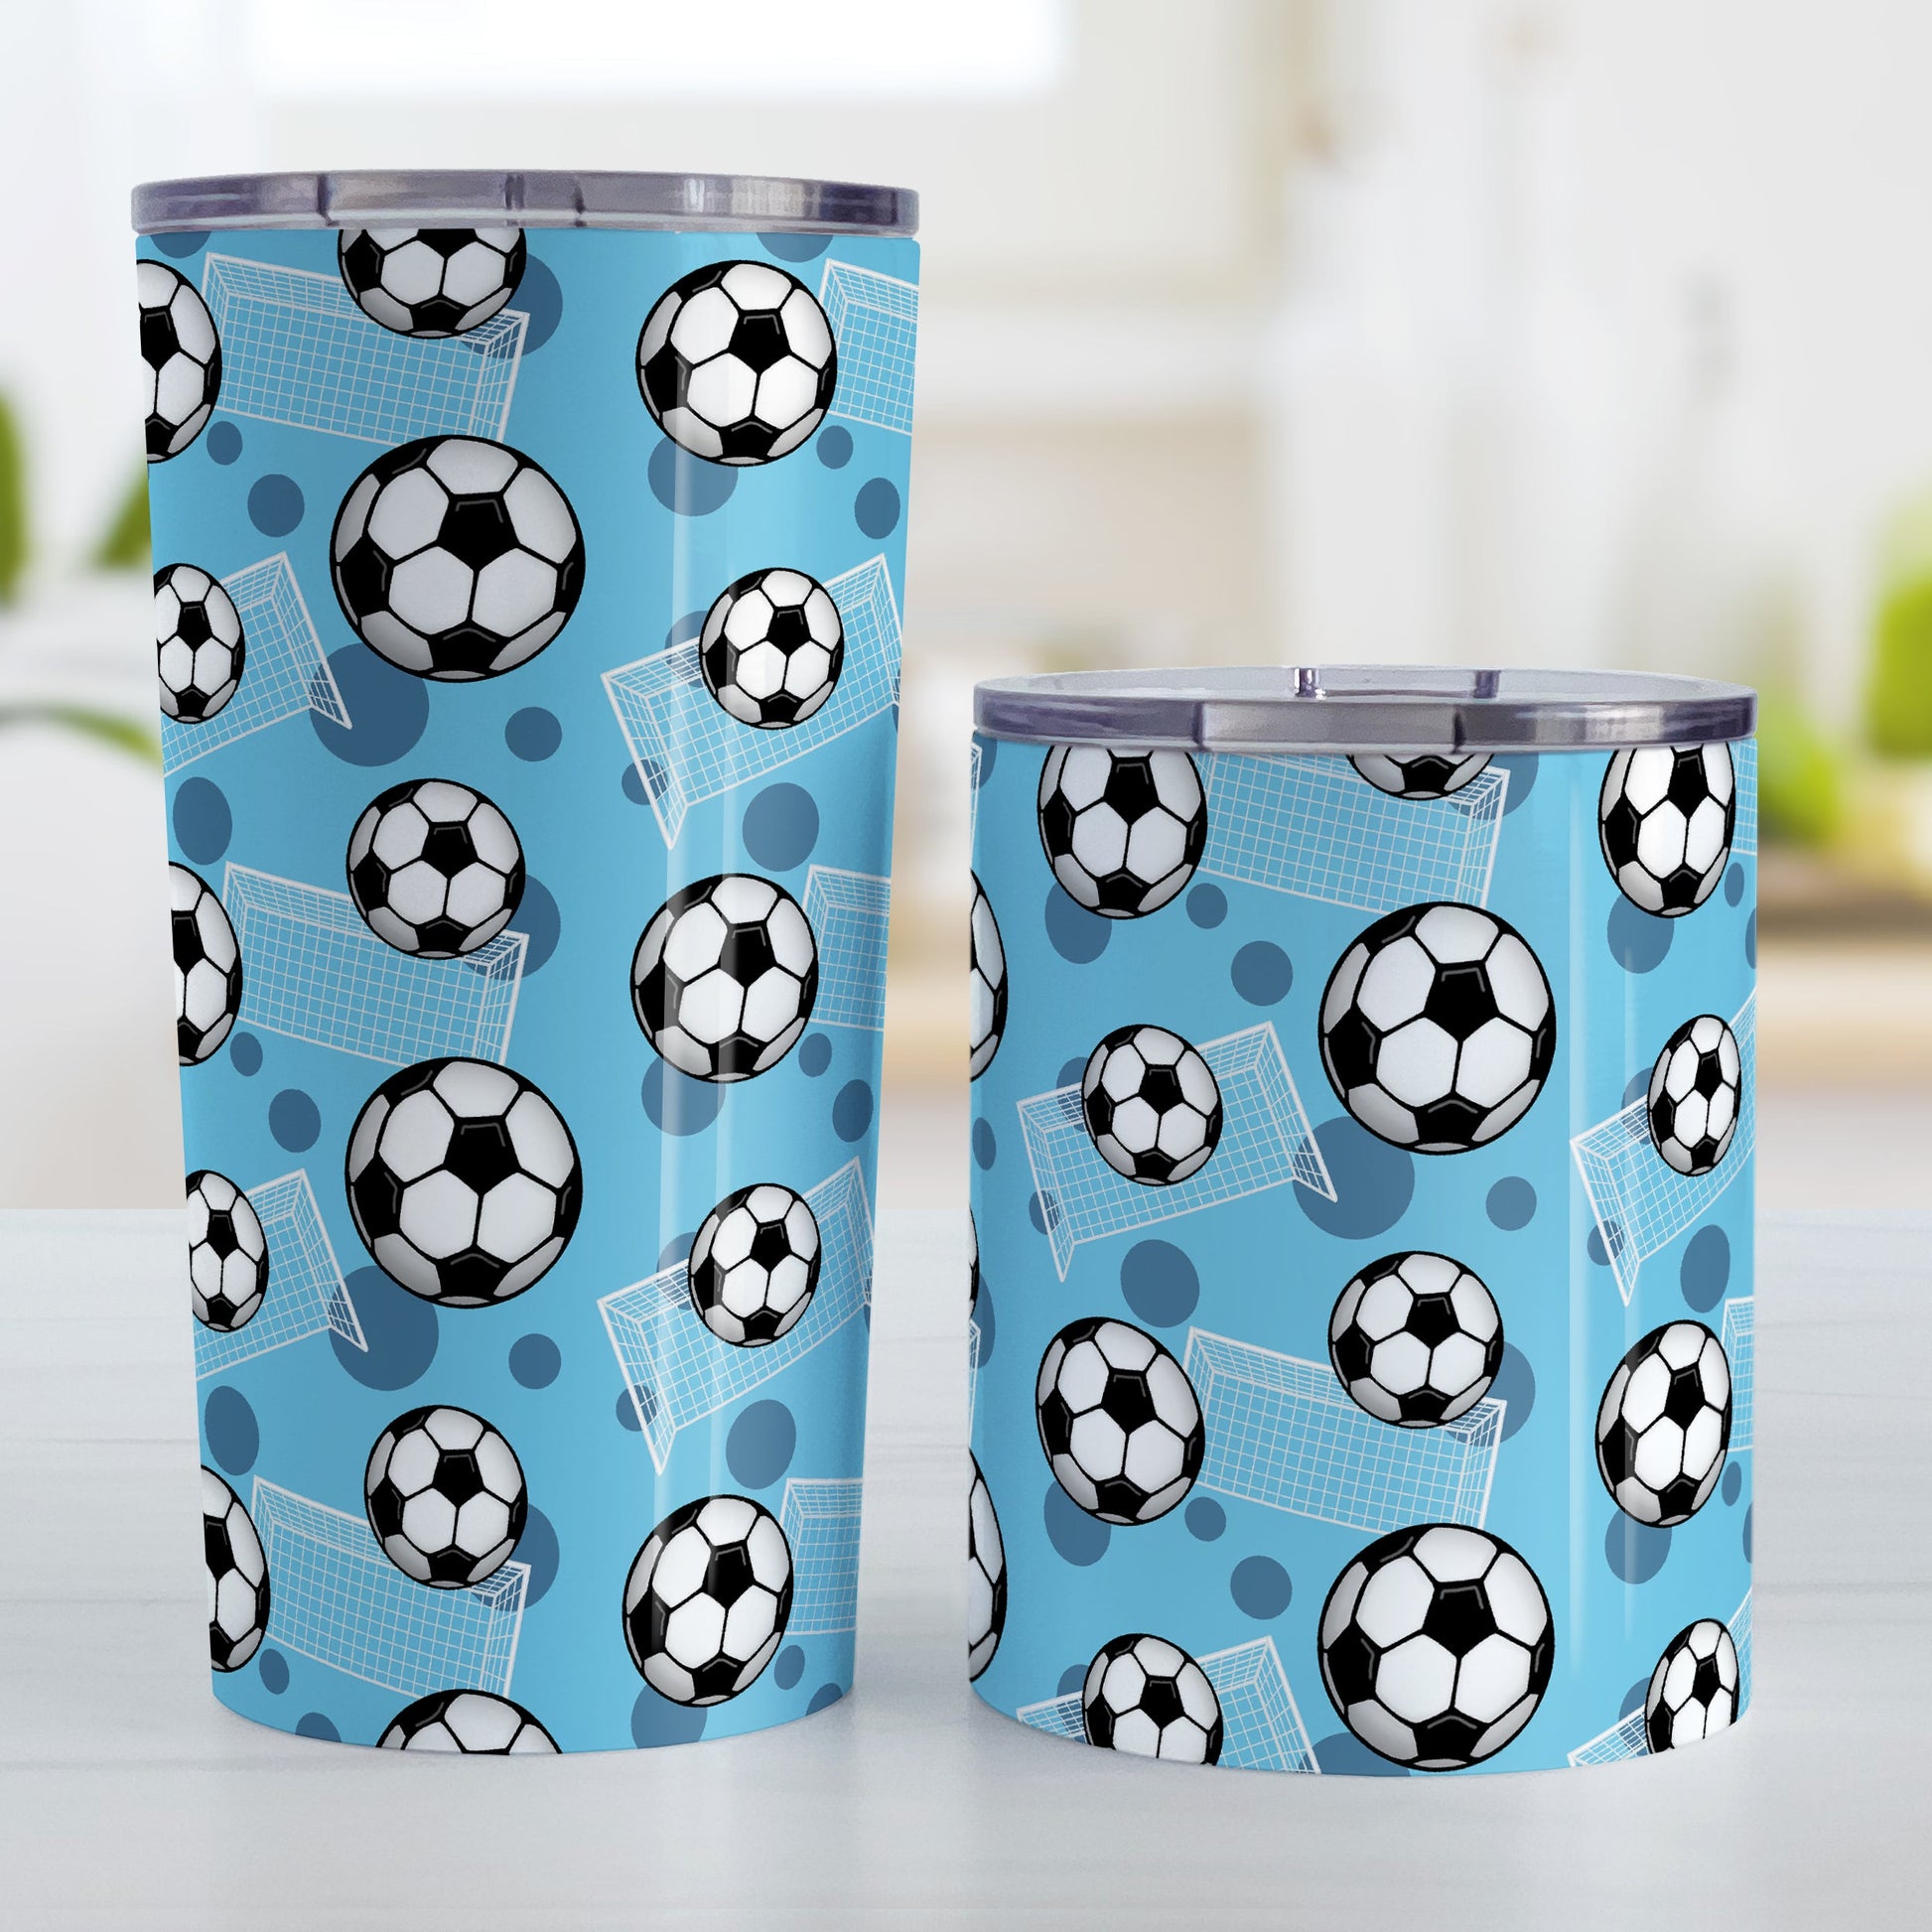 Soccer Ball and Goal Pattern Blue Tumbler Cup (20oz and 10oz) at Amy's Coffee Mugs. Stainless steel insulated tumbler cups designed with a pattern of soccer balls and goals over a blue background that wraps around the cups. These blue soccer tumbler cups are perfect for people who love or play soccer. Photo shows both sized cups next to each other.